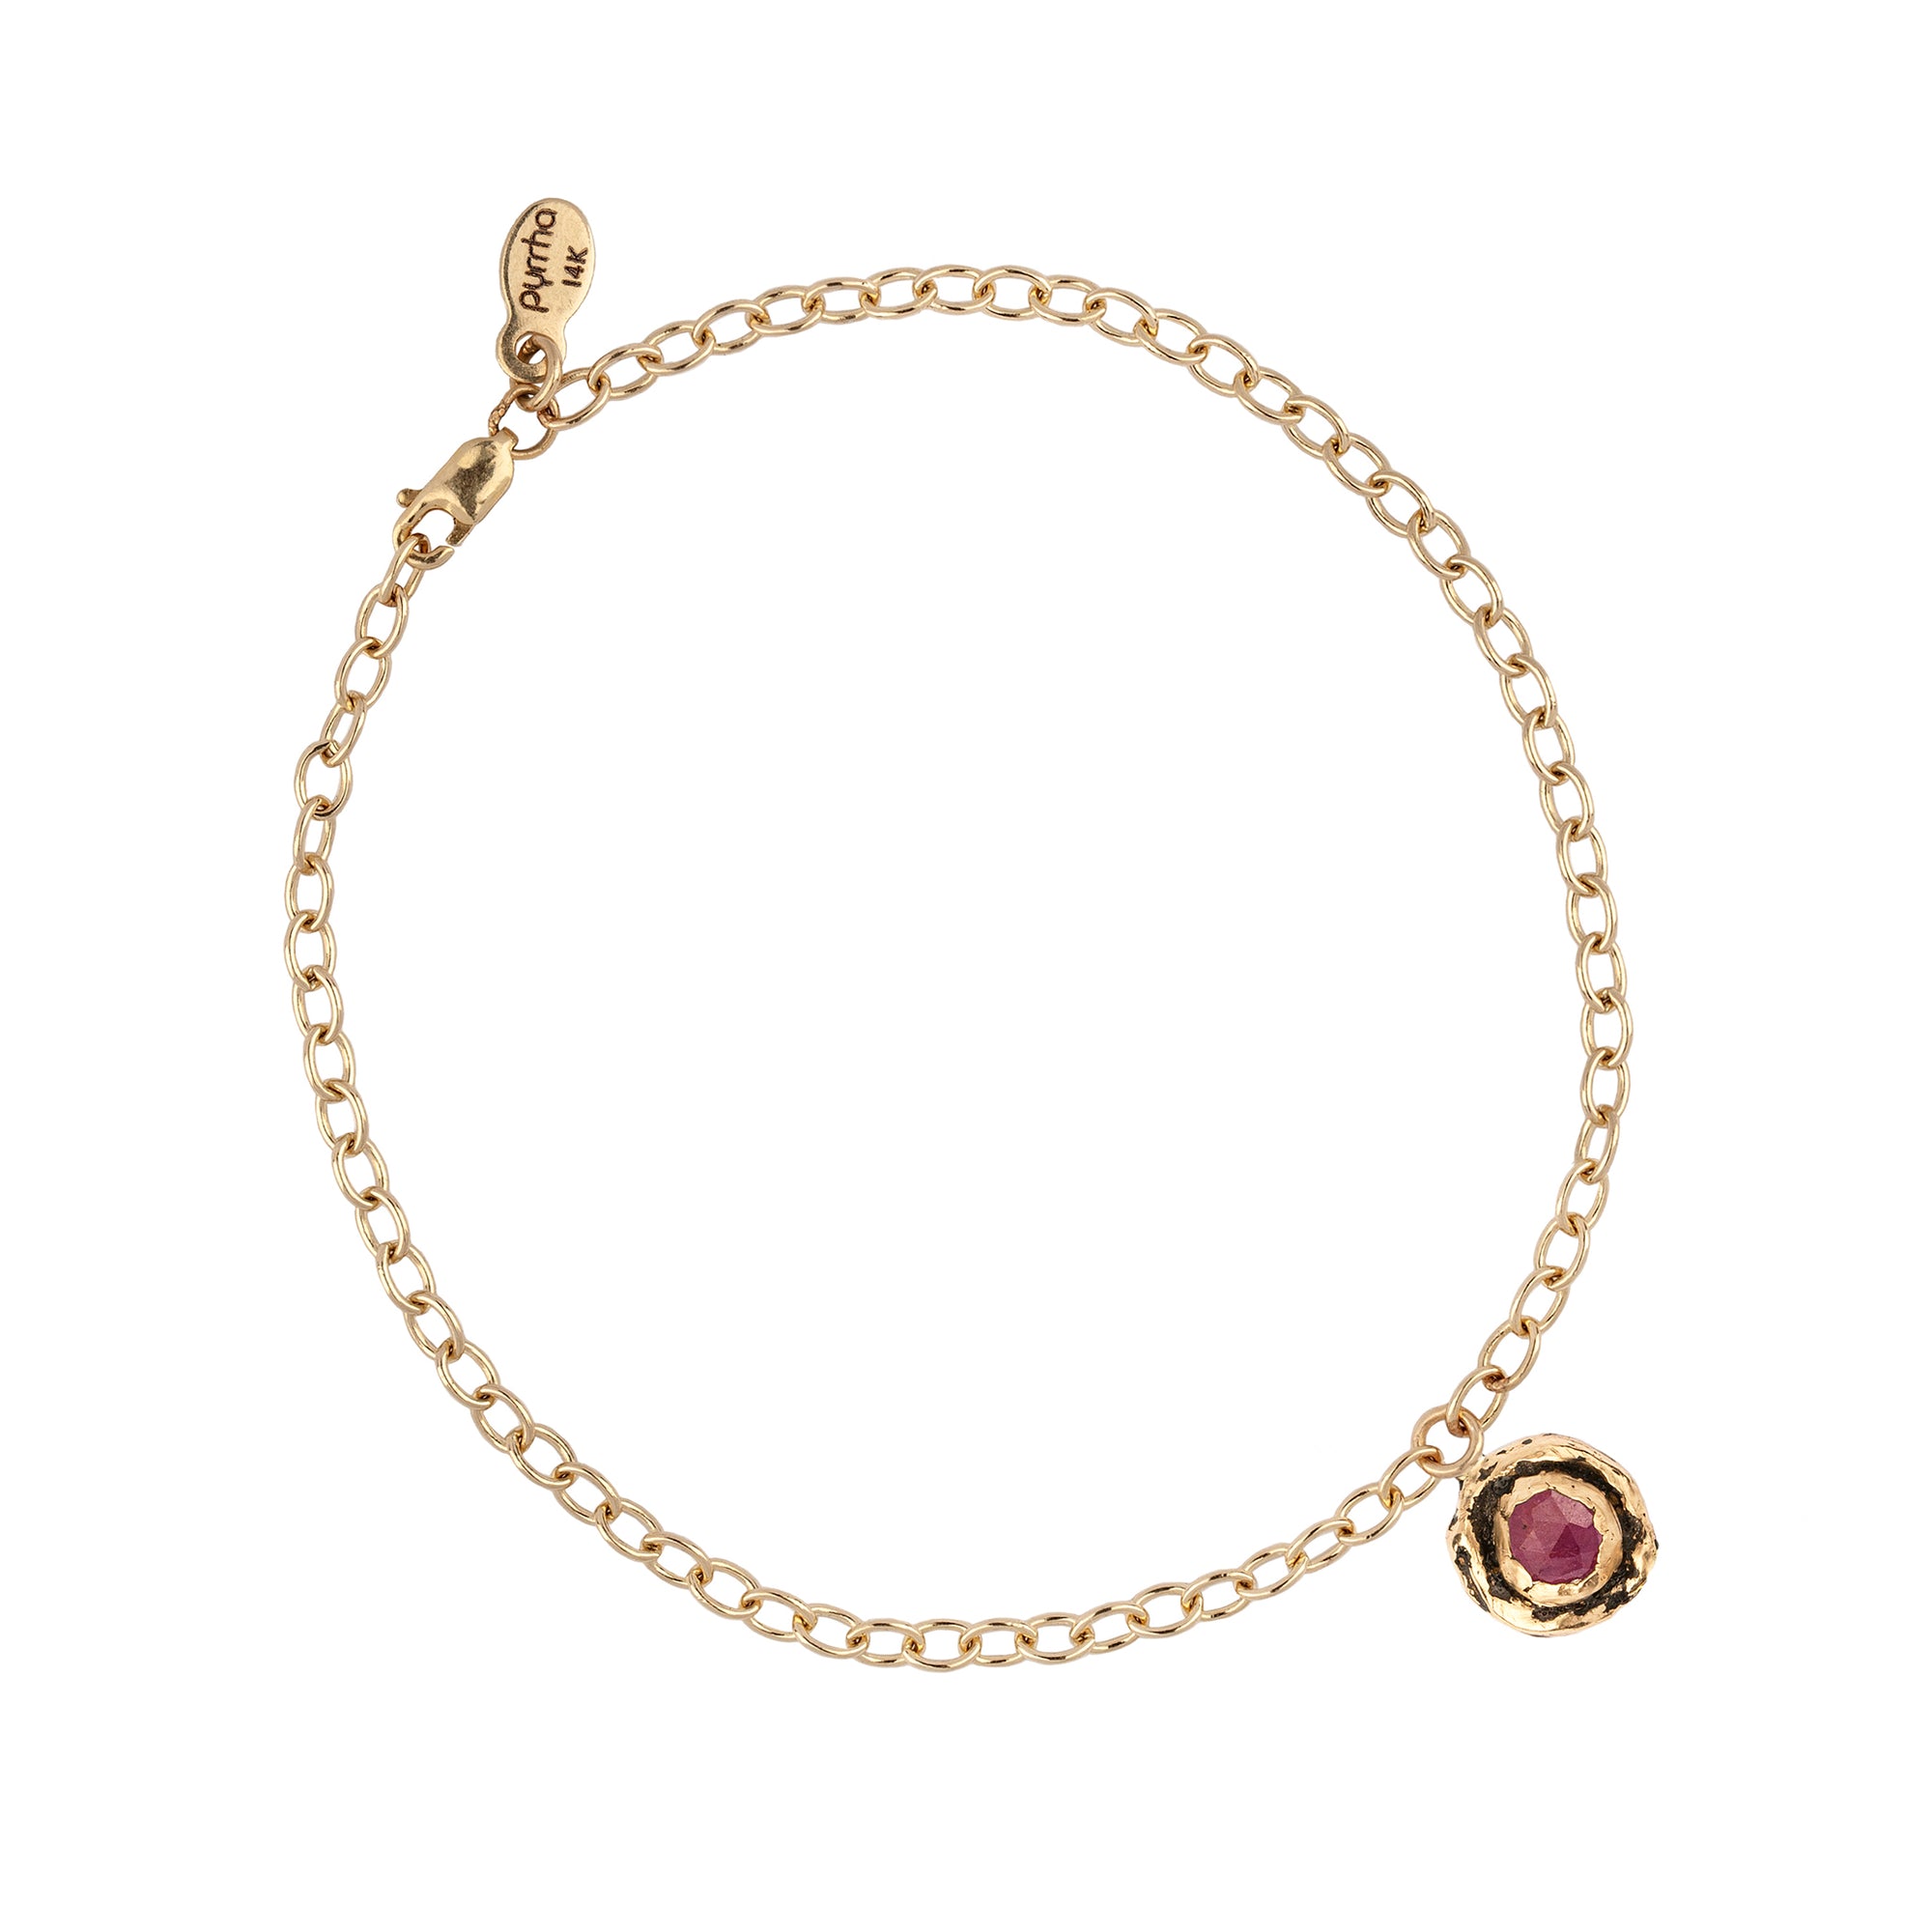 A 14k gold chain bracelet featuring our 14k gold ruby faceted stone talisman.